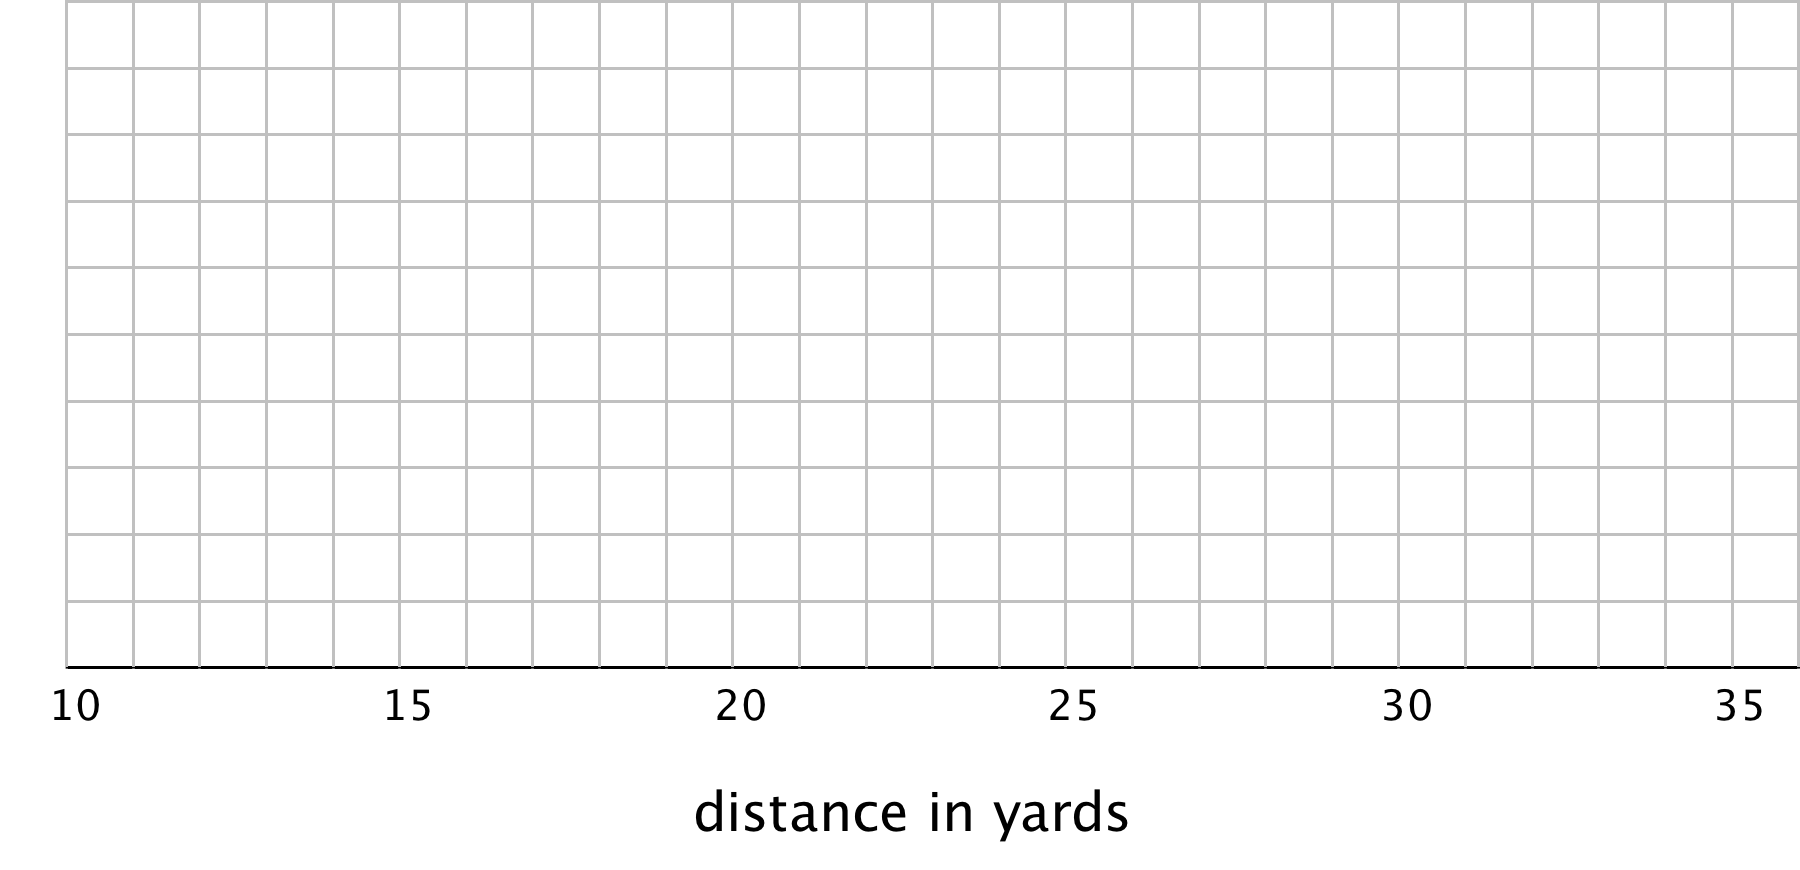 A blank grid with the horizontal axis labeled "distance in yards". The numbers 10 through 35, in increments of 5, are indicated. There are 4 evenly spaced vertical gridlines between each number indicated.